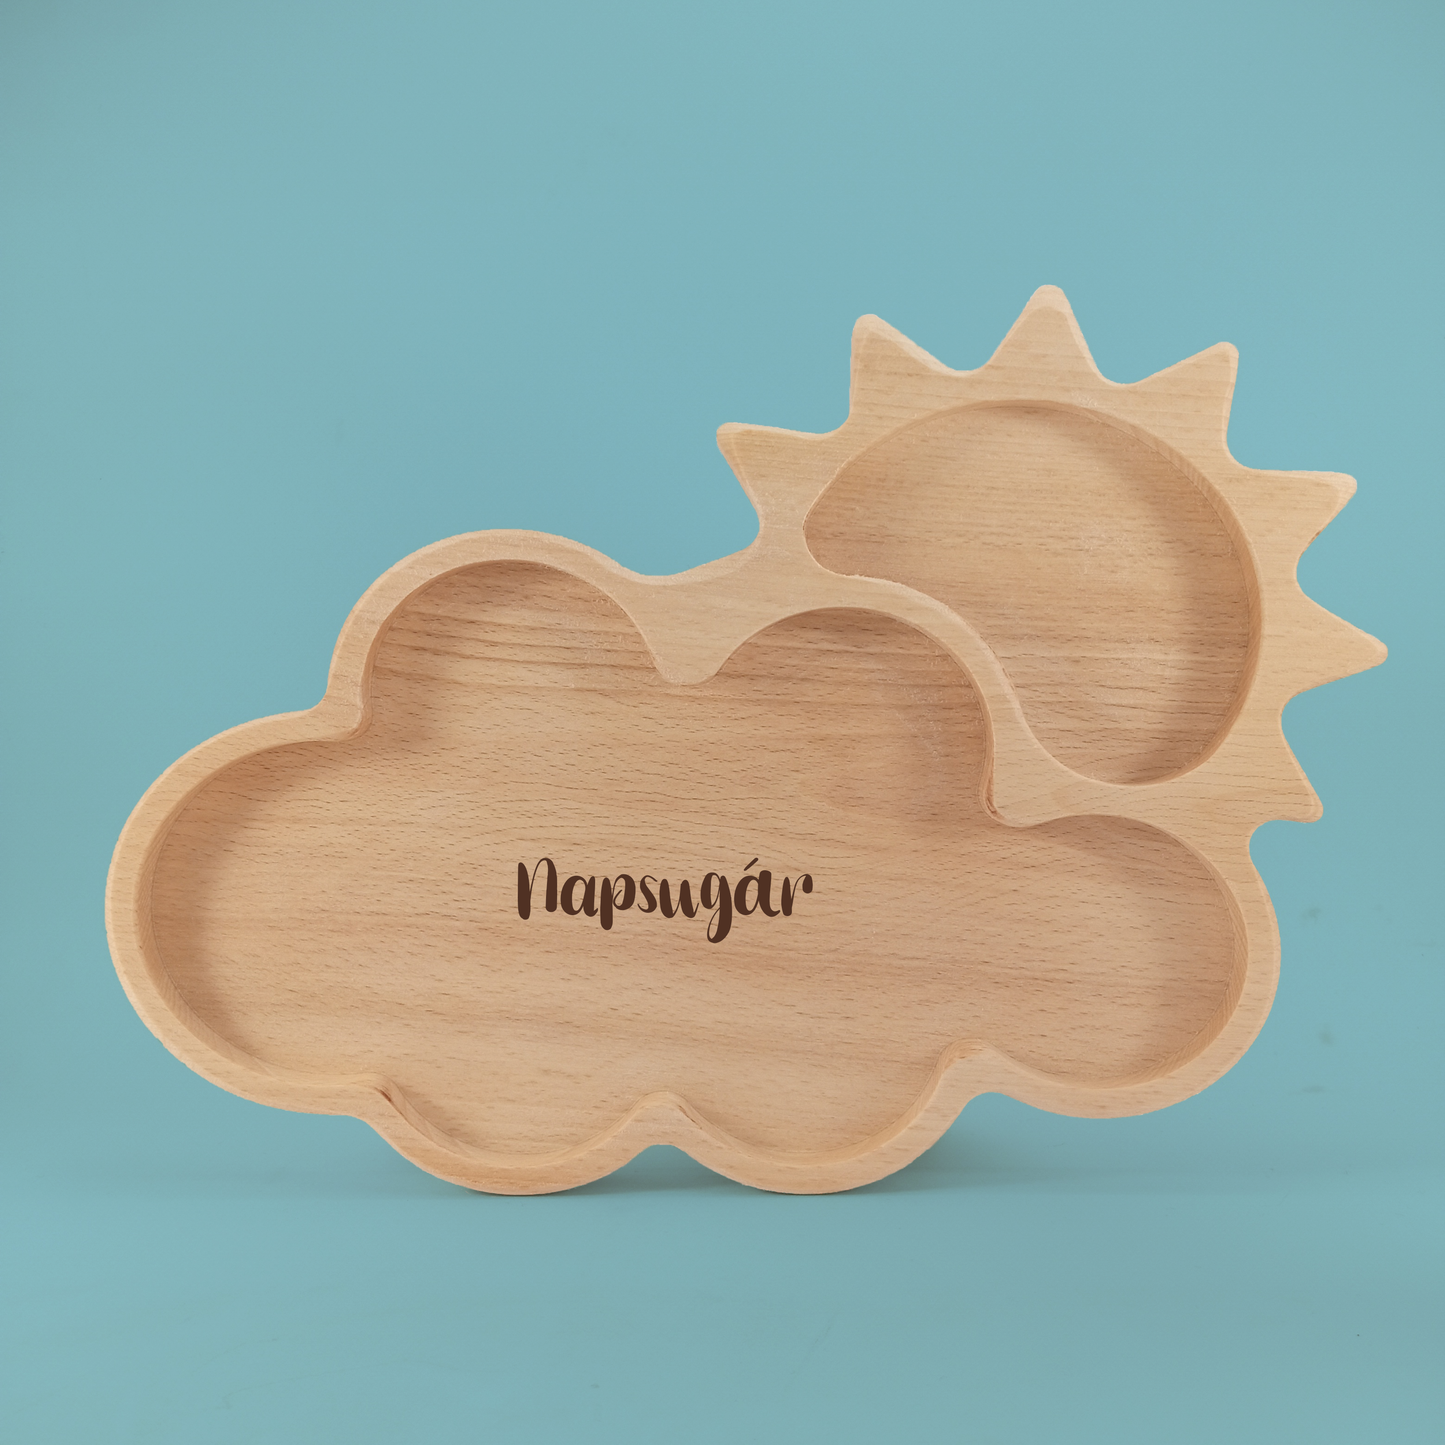 Cloud shaped wooden plate